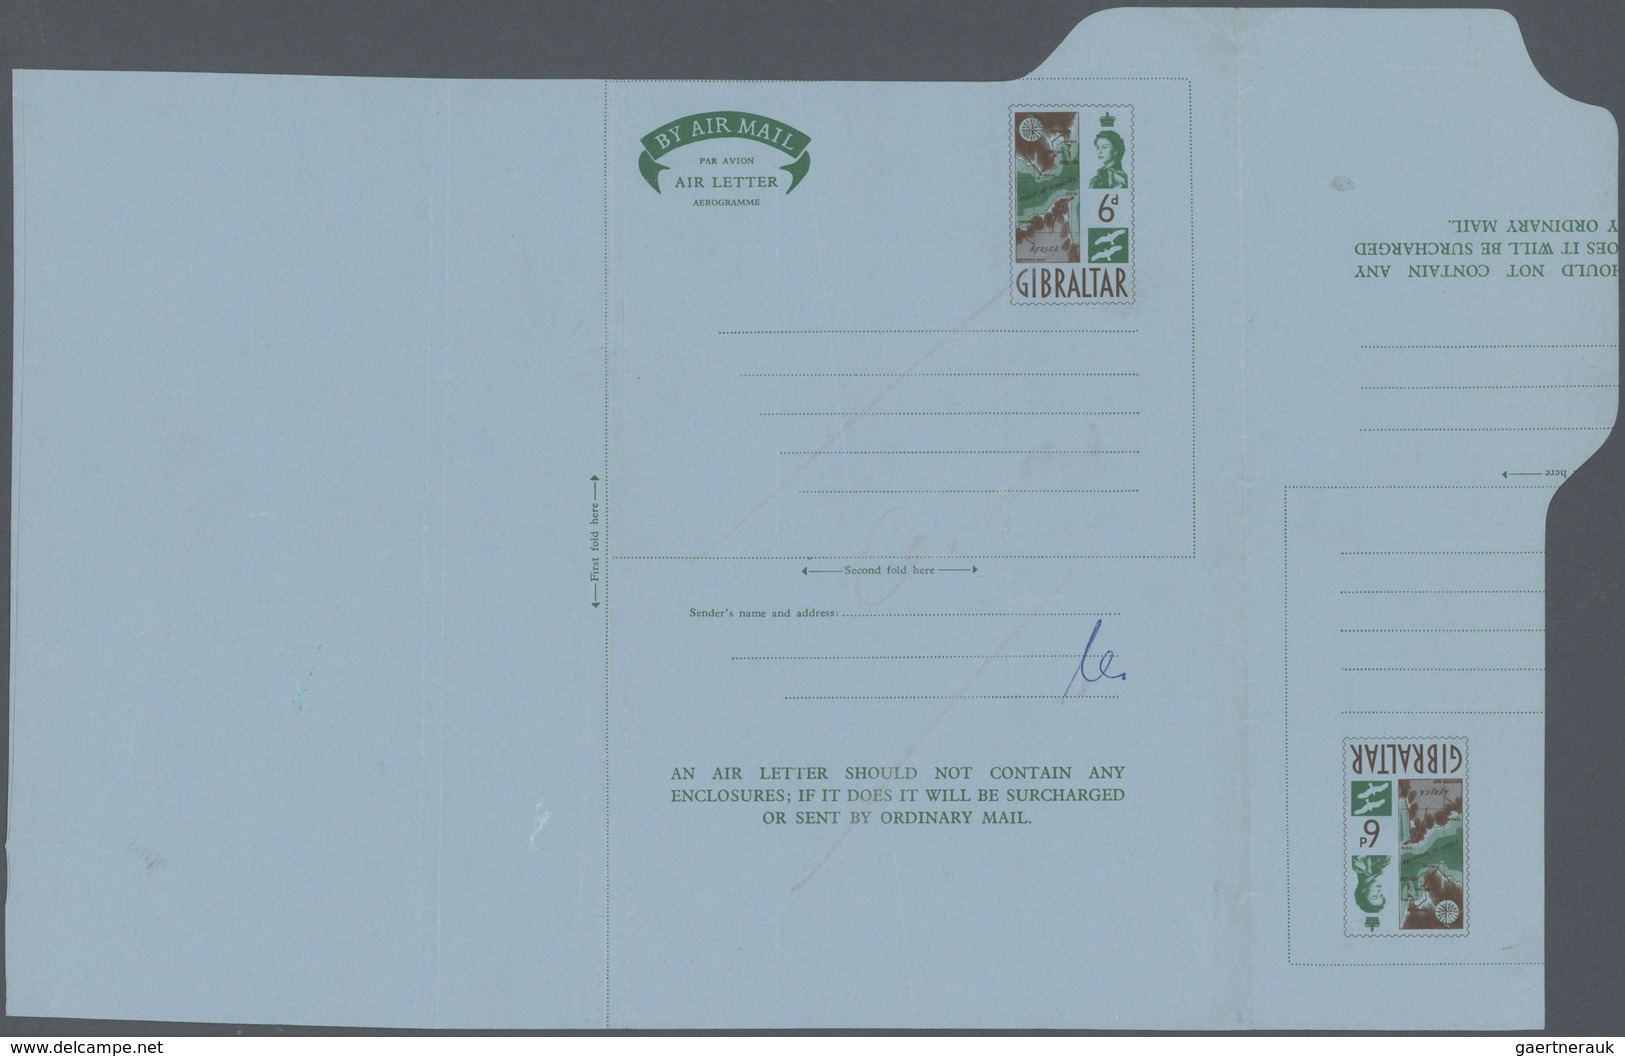 Gibraltar - Ganzsachen: 1955/1979, Collection of about 50 airletters with some special items like sh